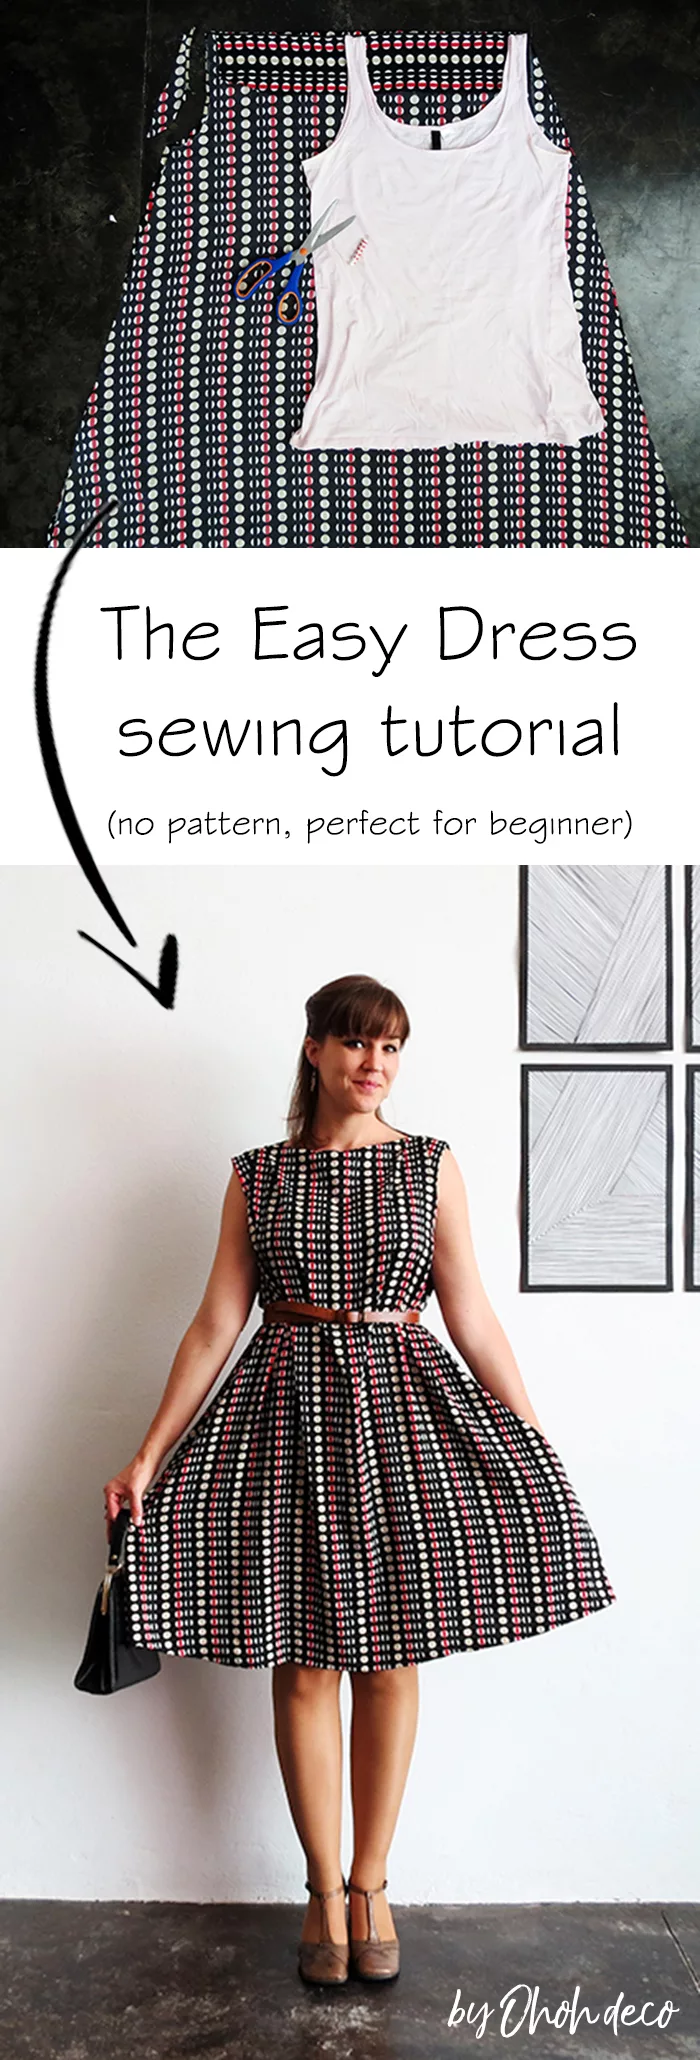 the easy dress sewing tutorial